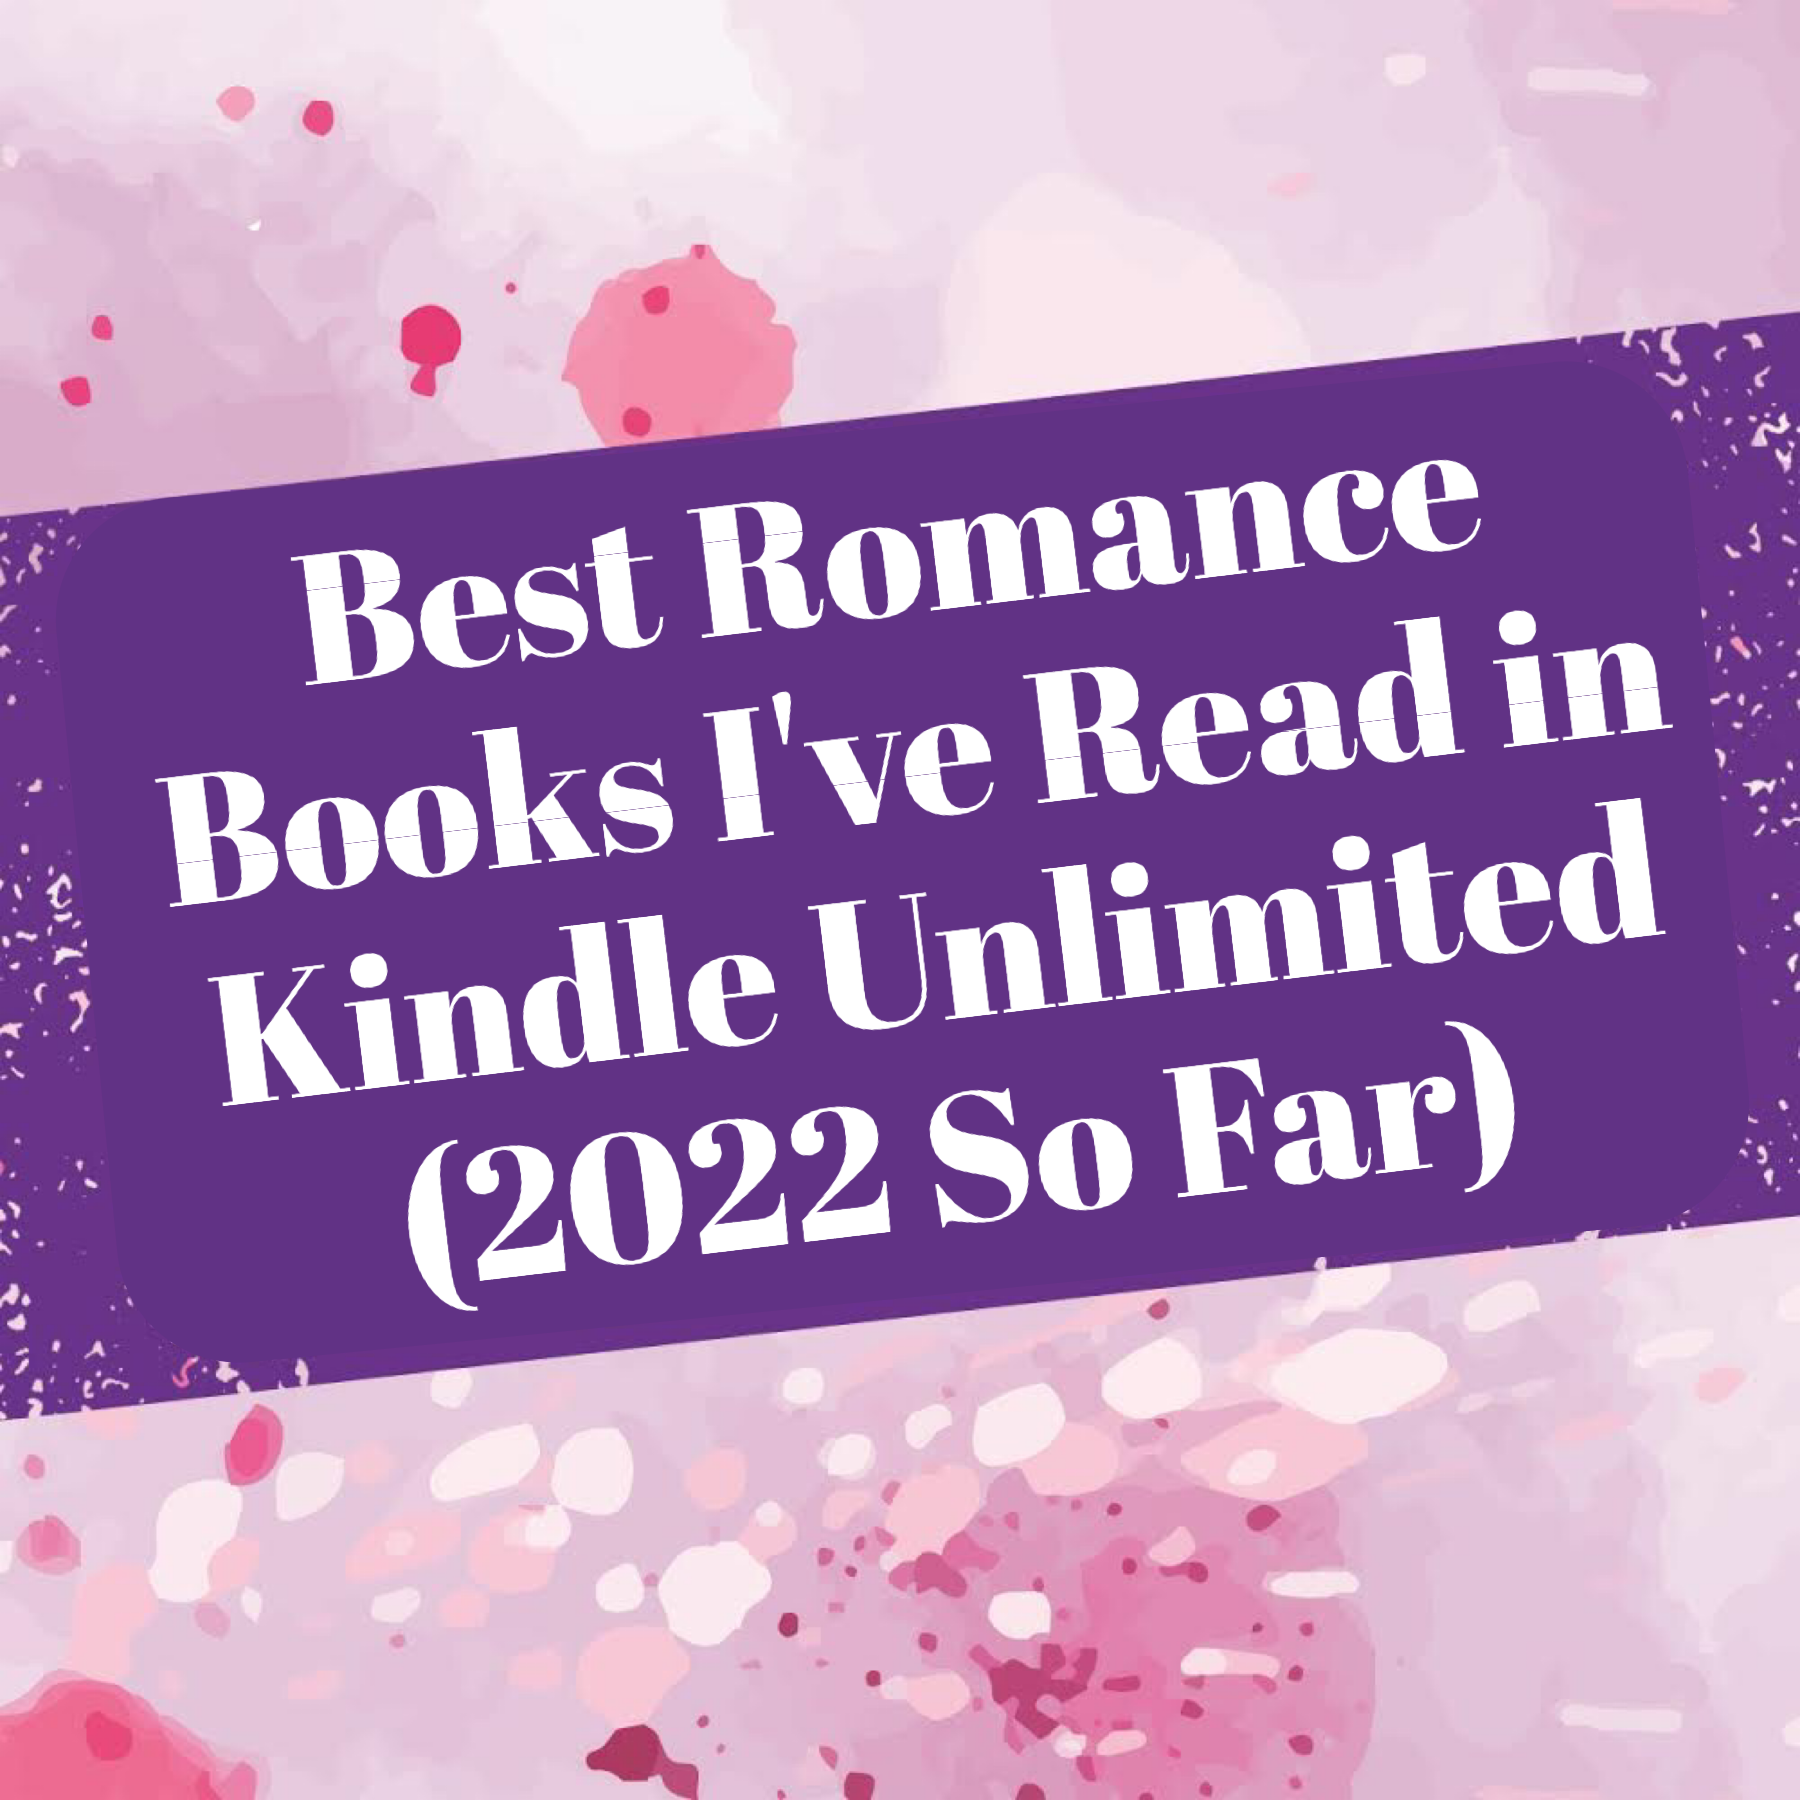 Best Romance Books Ive Read in Kindle Unlimited (2022 So Far)